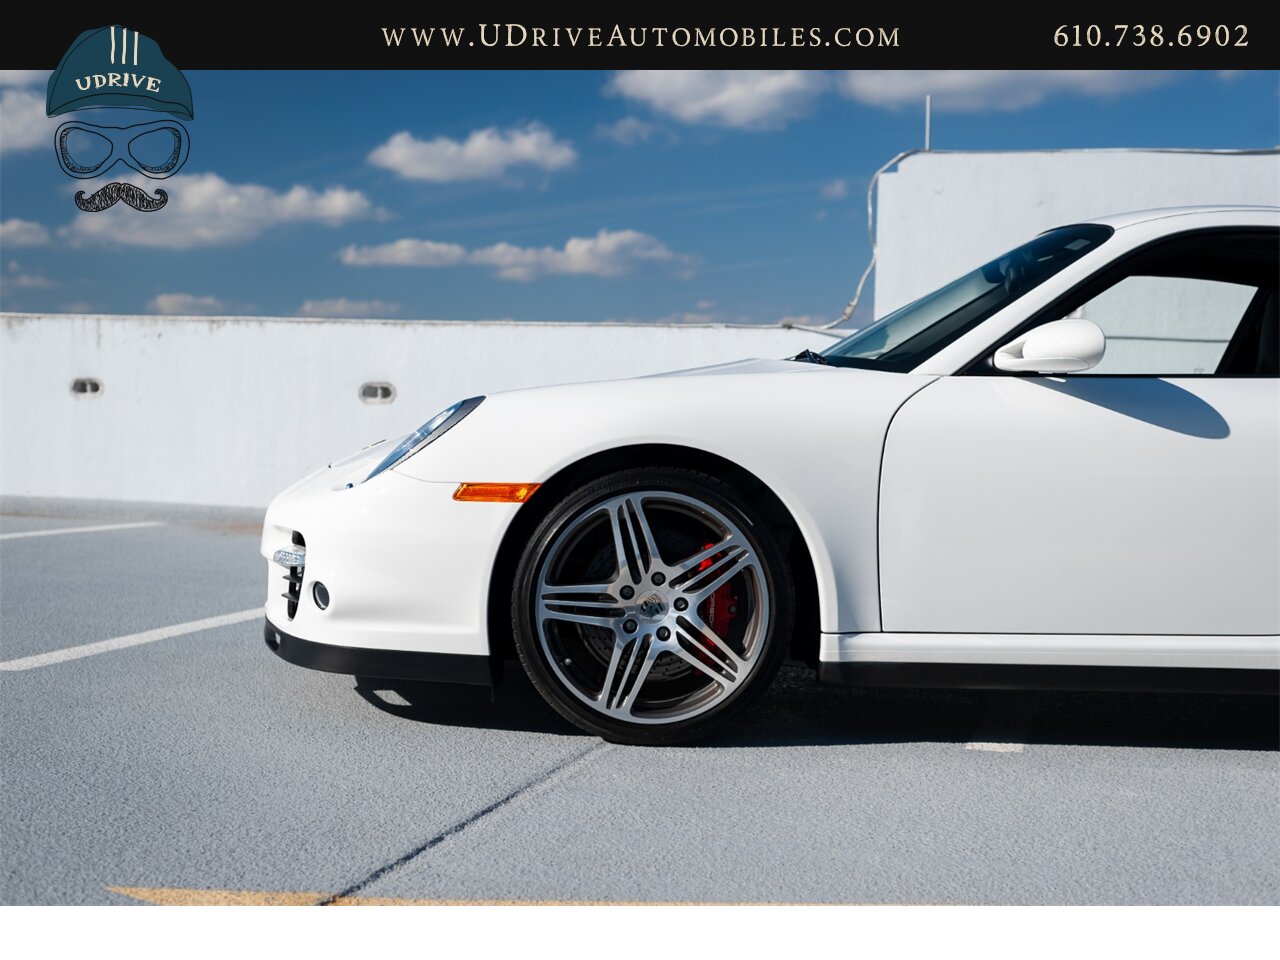 2007 Porsche 911 Turbo 642 Miles 1 Owner Carrara White 997  Sport Chrono Adaptive Sport Seats All Documentation from New - Photo 10 - West Chester, PA 19382